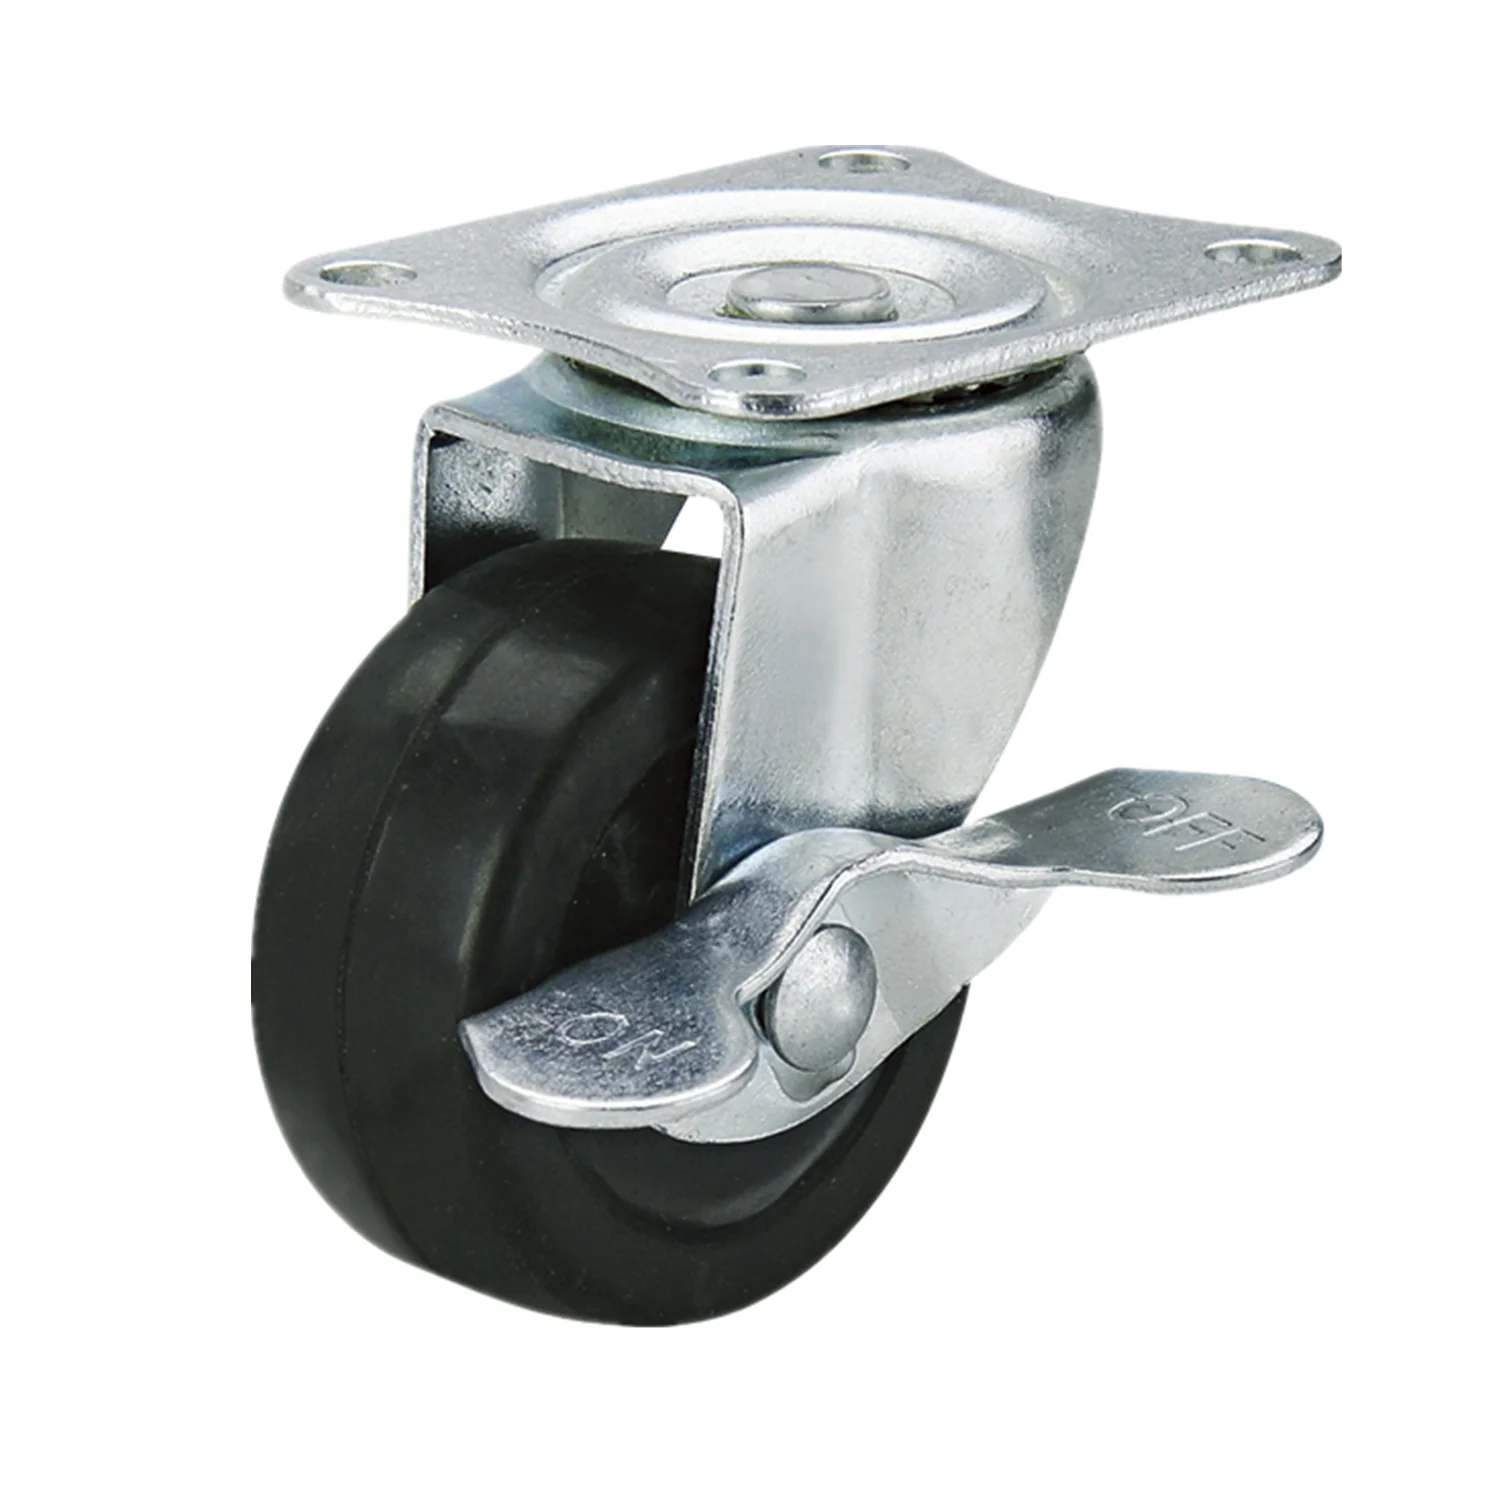 1" 1.25" 1.5" 2" 2.5" 3" Chinese Manufacturing Furniture Swivel Top Plate Black Rubber Wheel Casters